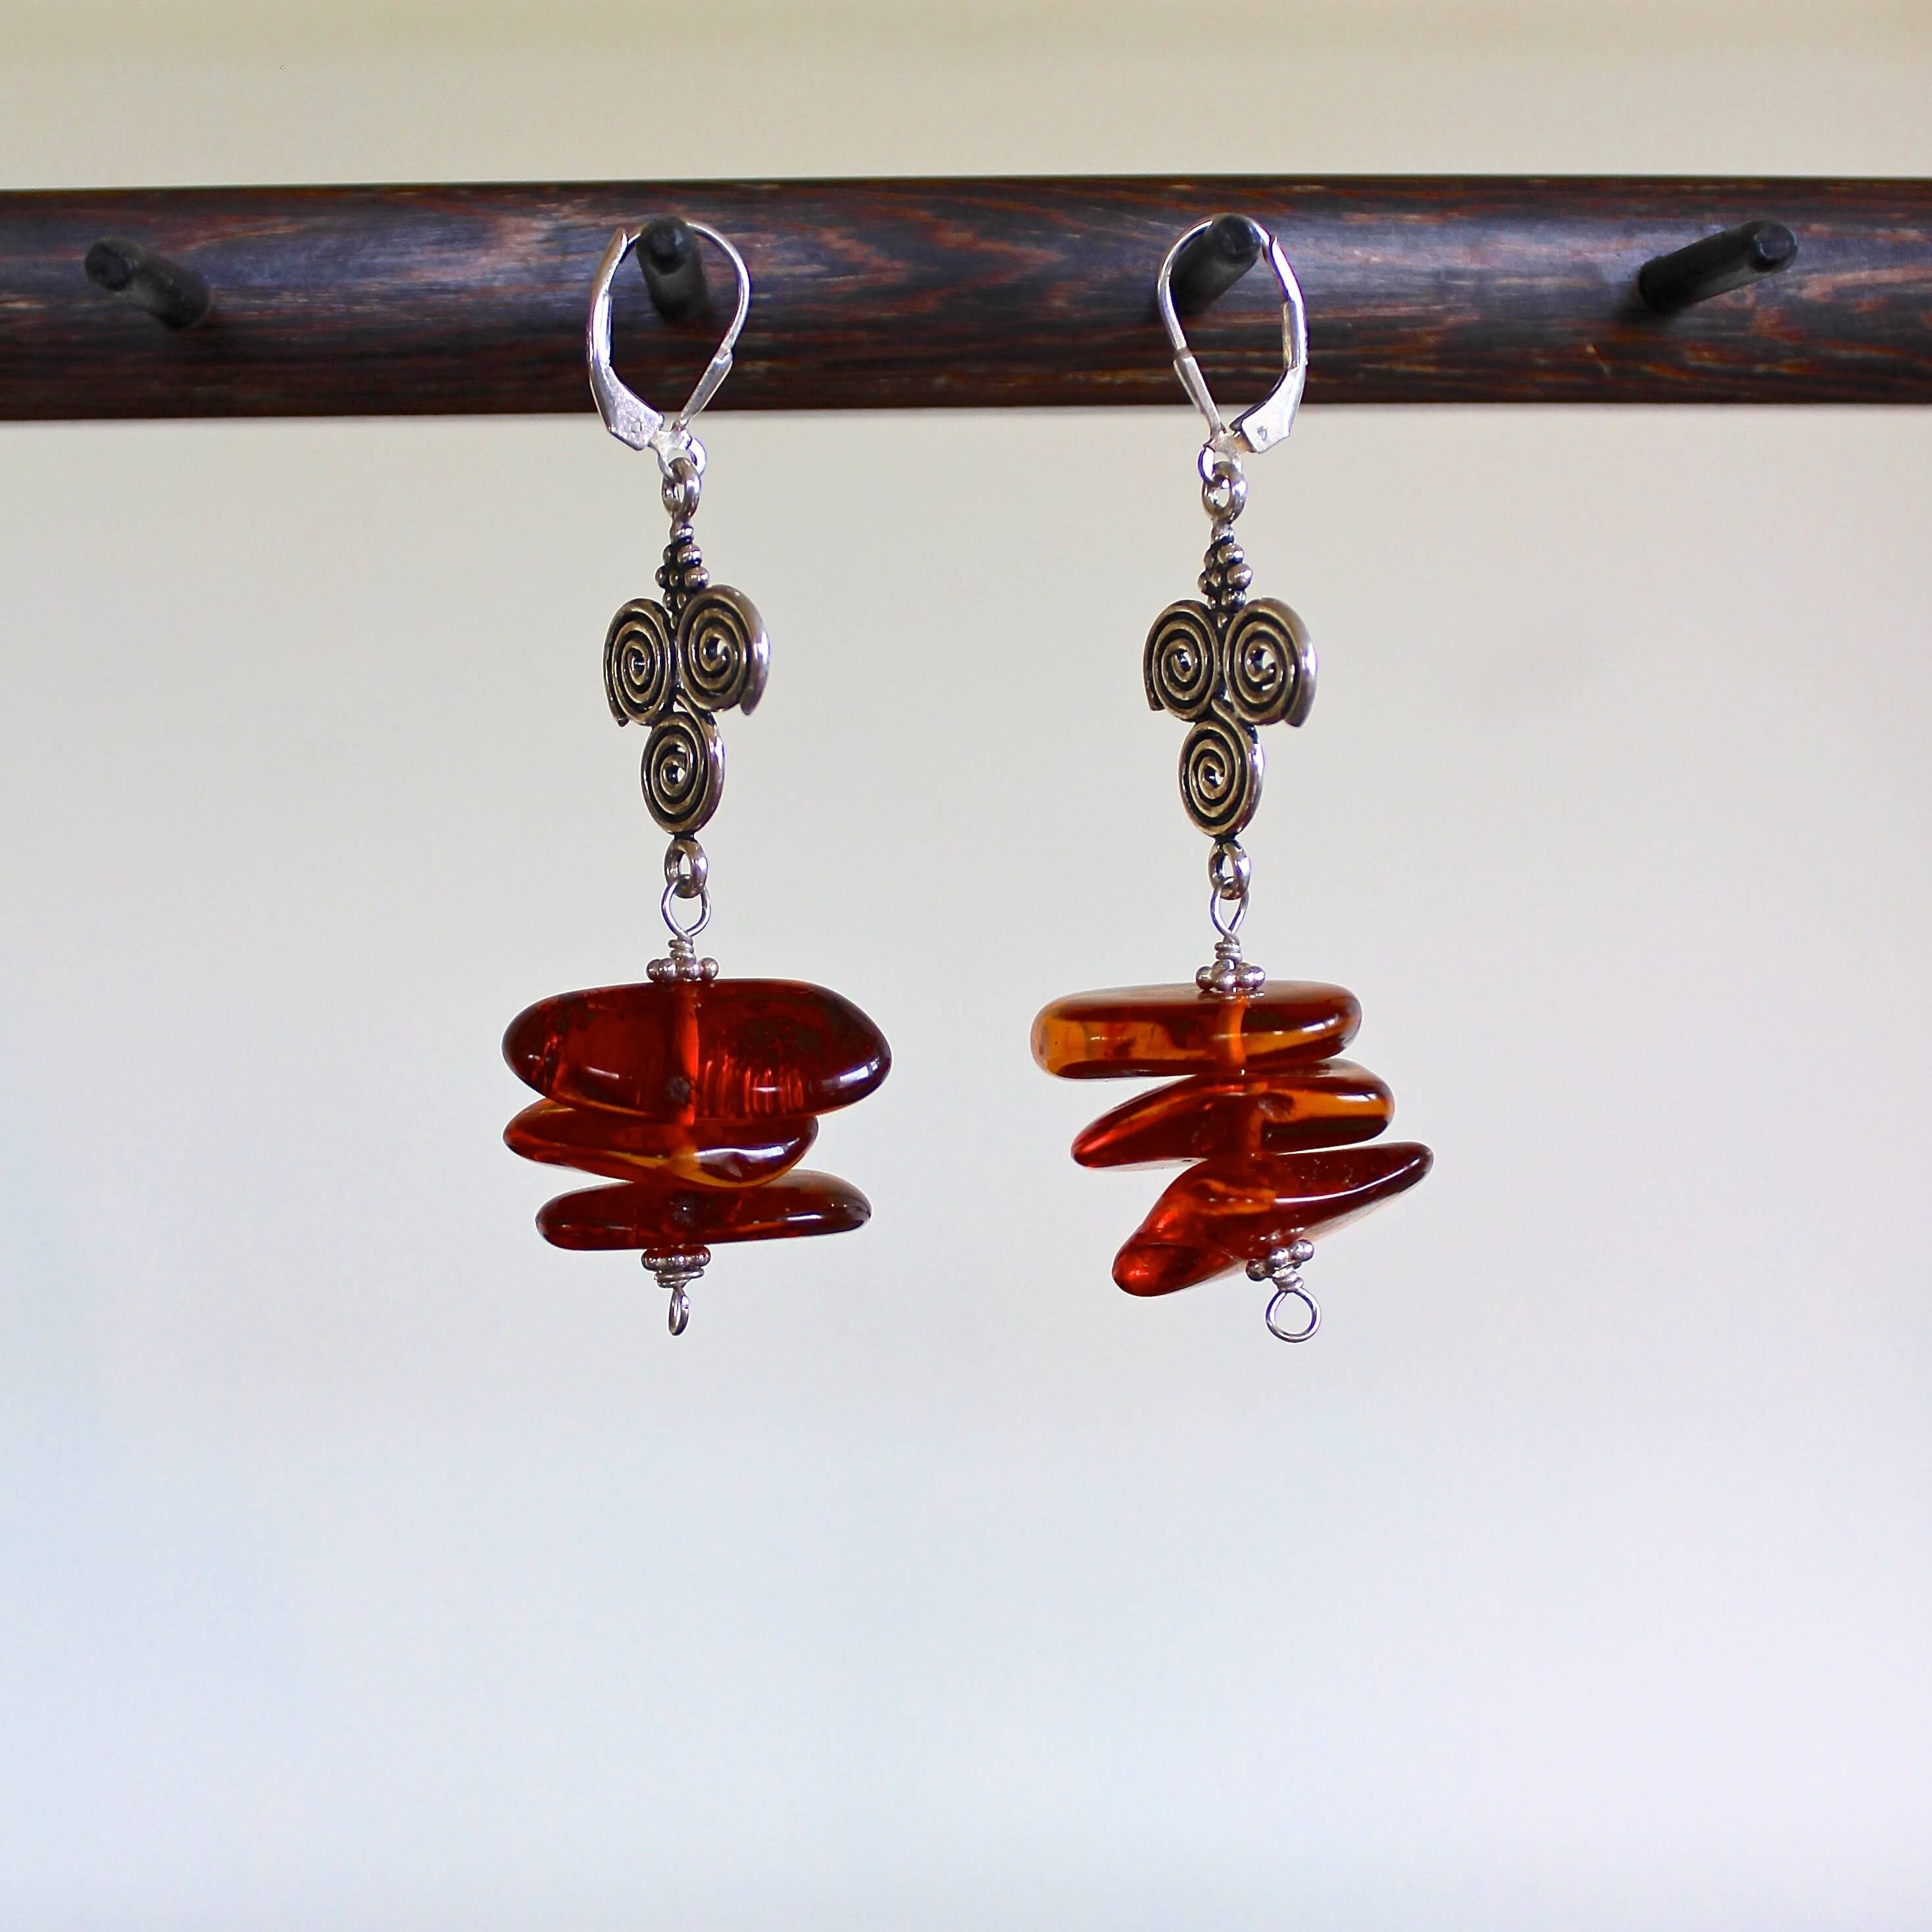 An eye level shot of a pair of Baltic Cognac Amber and Sterling Silver Spiral Pendant Earrings hanging on a dark wooden stand in front of a white wall. The earrings feature rich, reddish brown cognac amber beads, flat sterling silver charms with three spiral shapes, two on top, one on bottom, sterling silver beads with sterling silver lever back ear wires